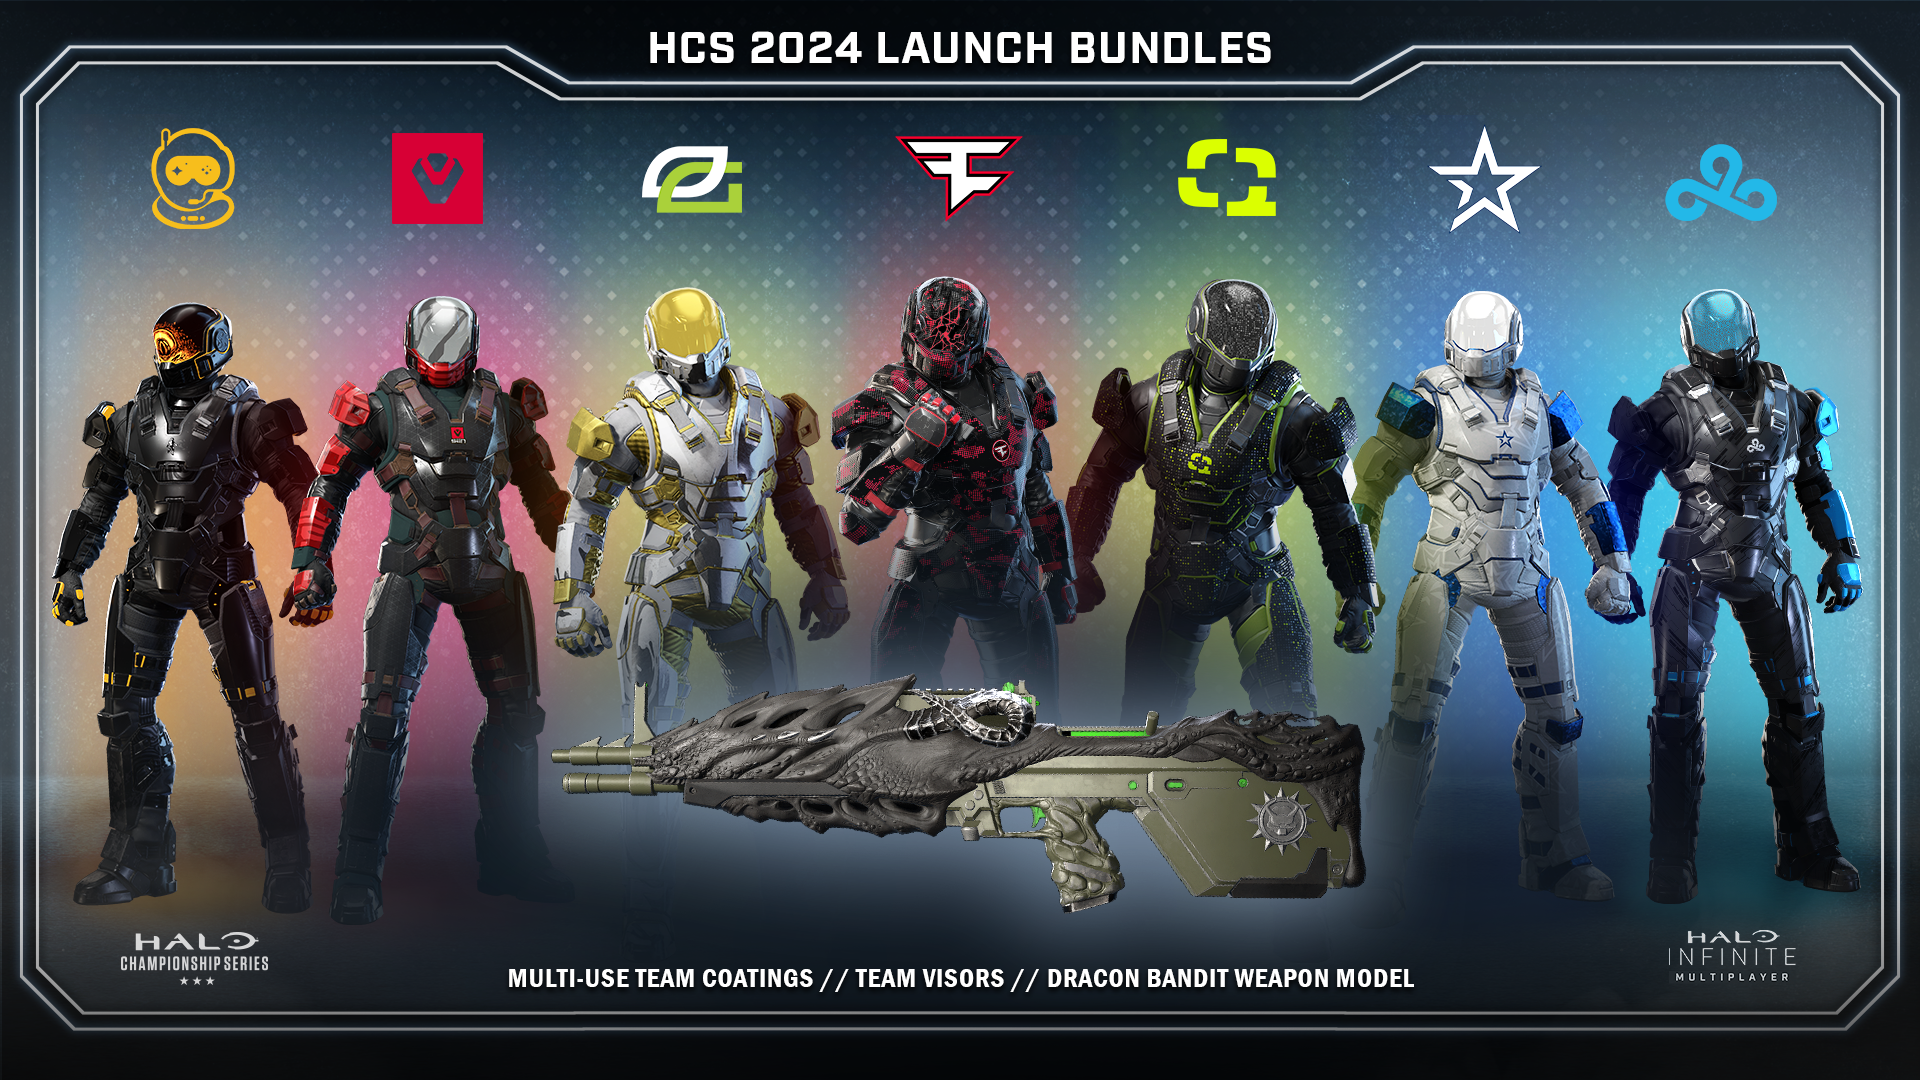 Halo Infinite image of the HCS 2024 Launch Bundles for partner teams. Text reads: 